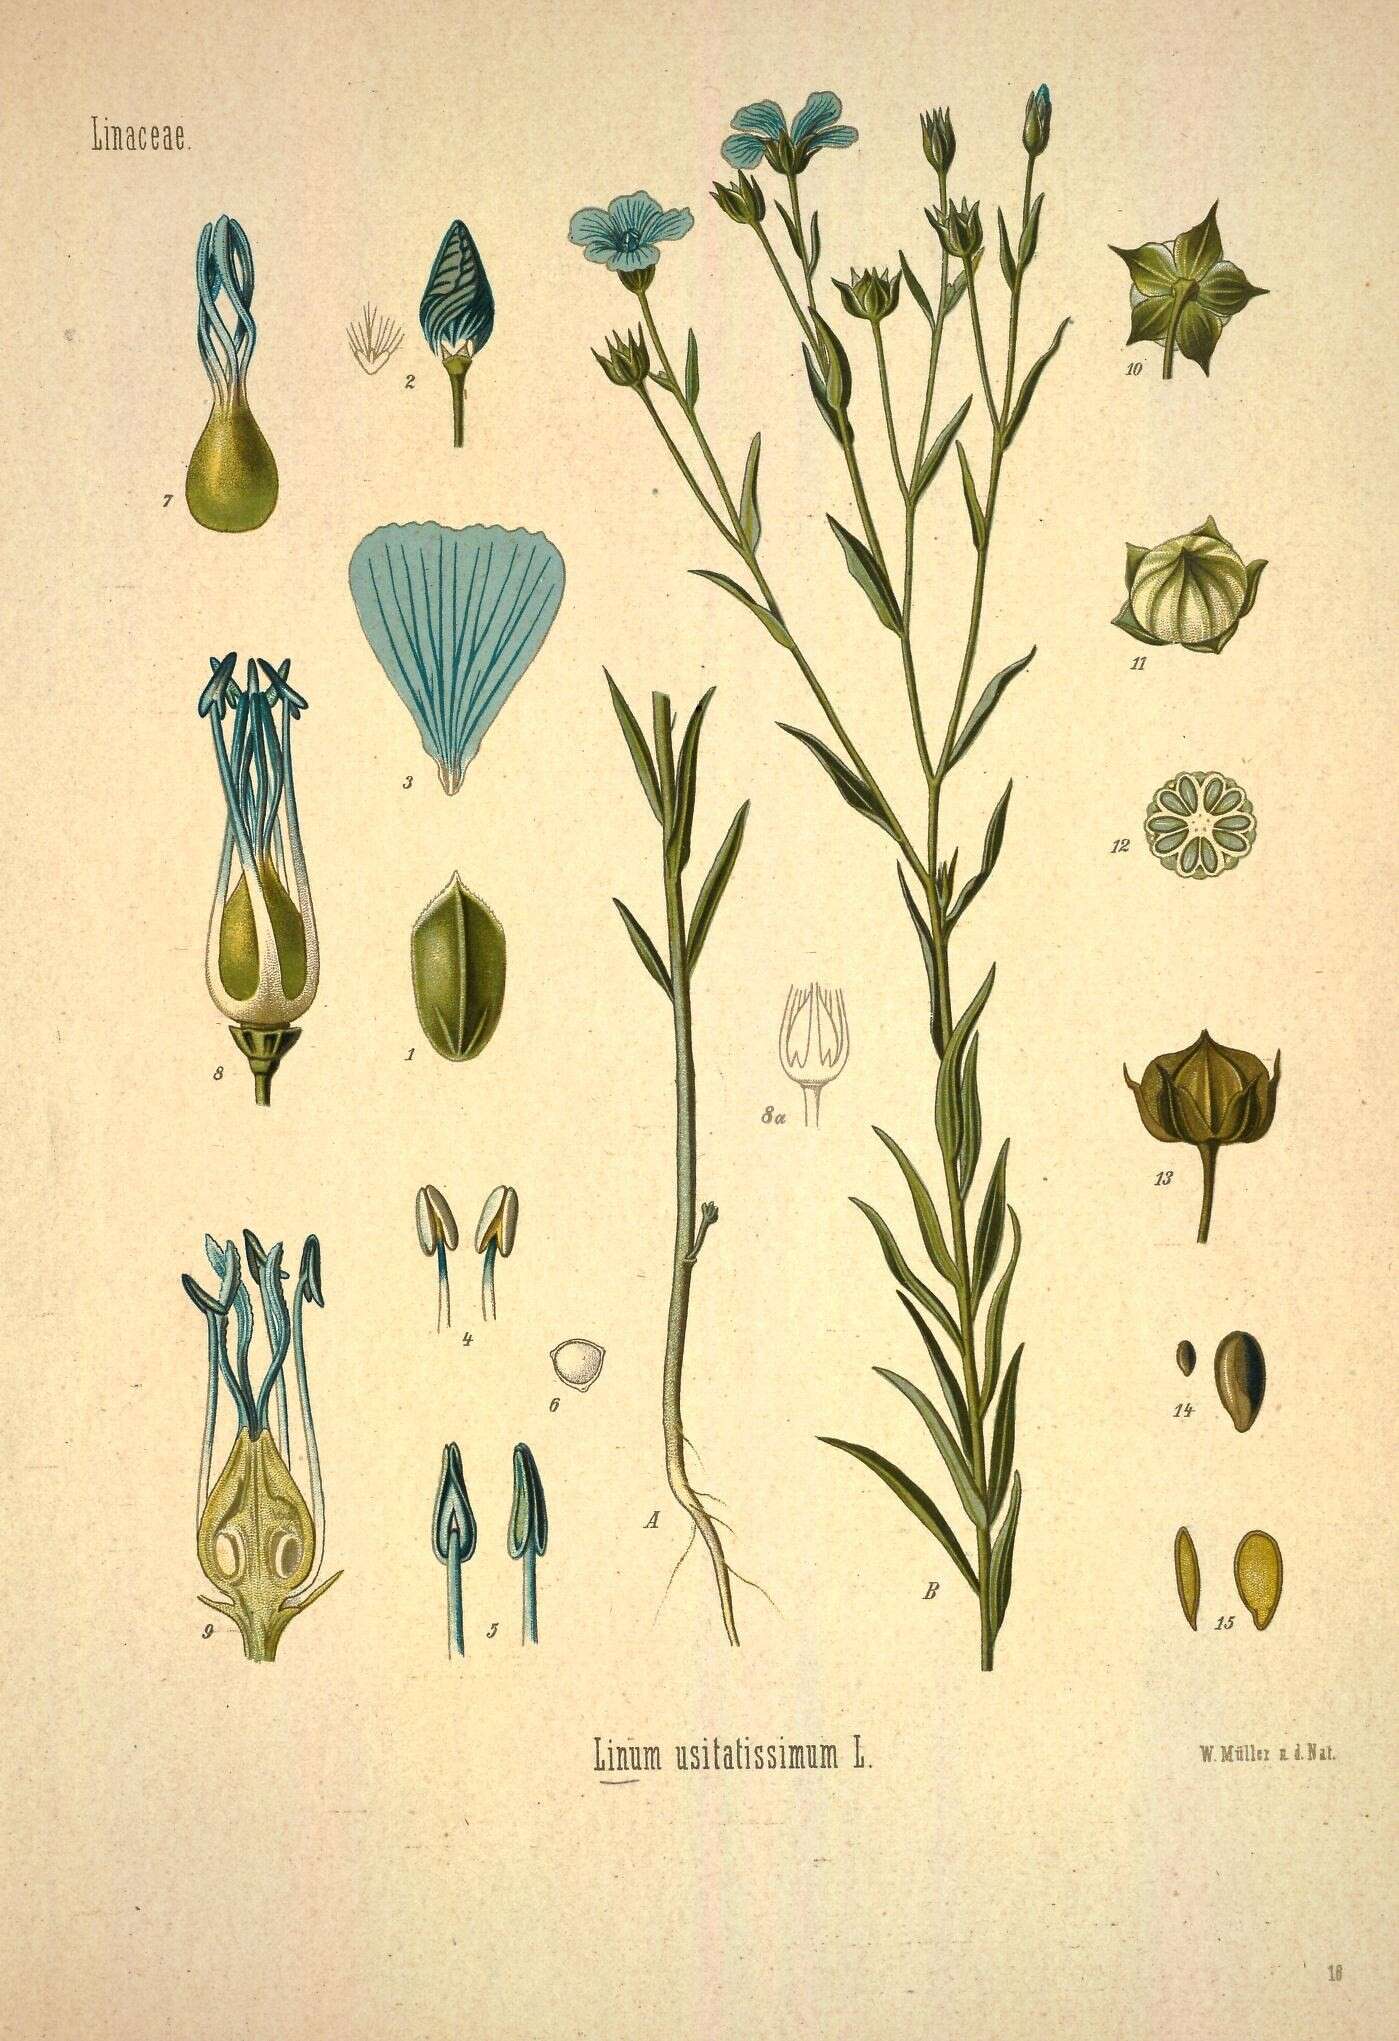 Image of flax